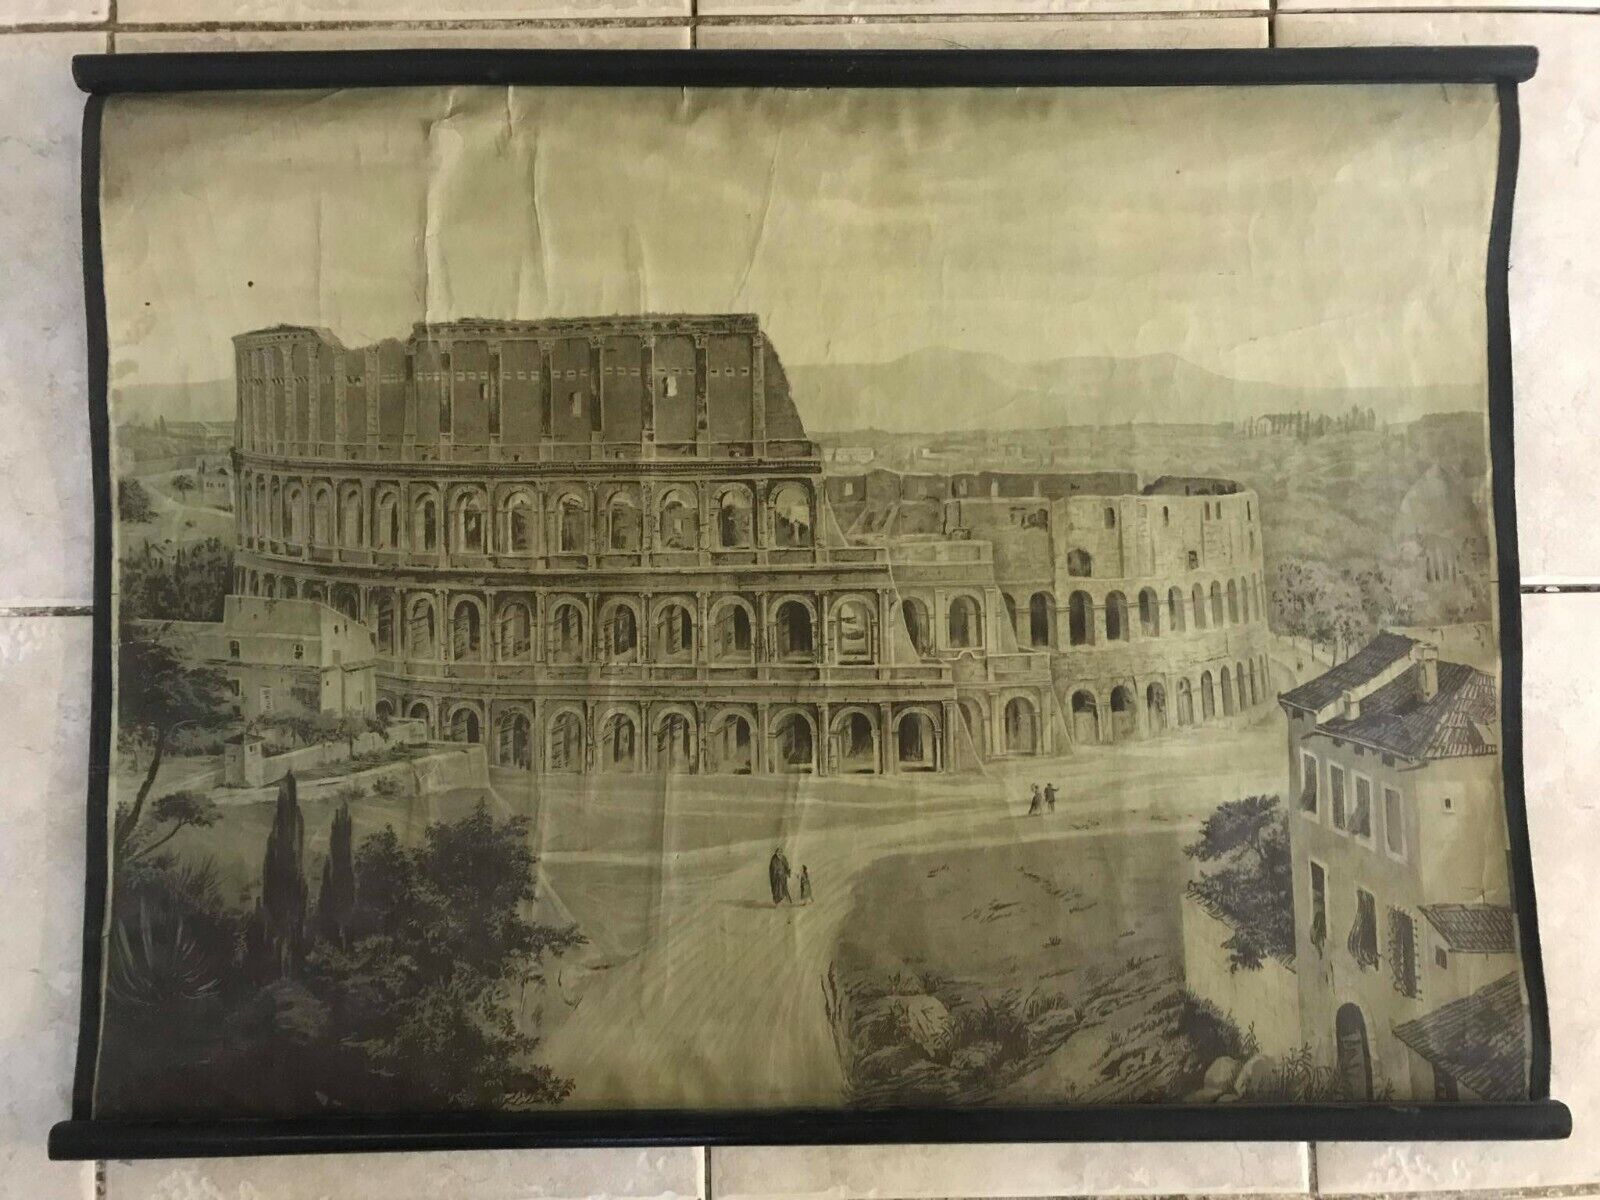 Colosseum - Italy- Rome litography - litograph poster